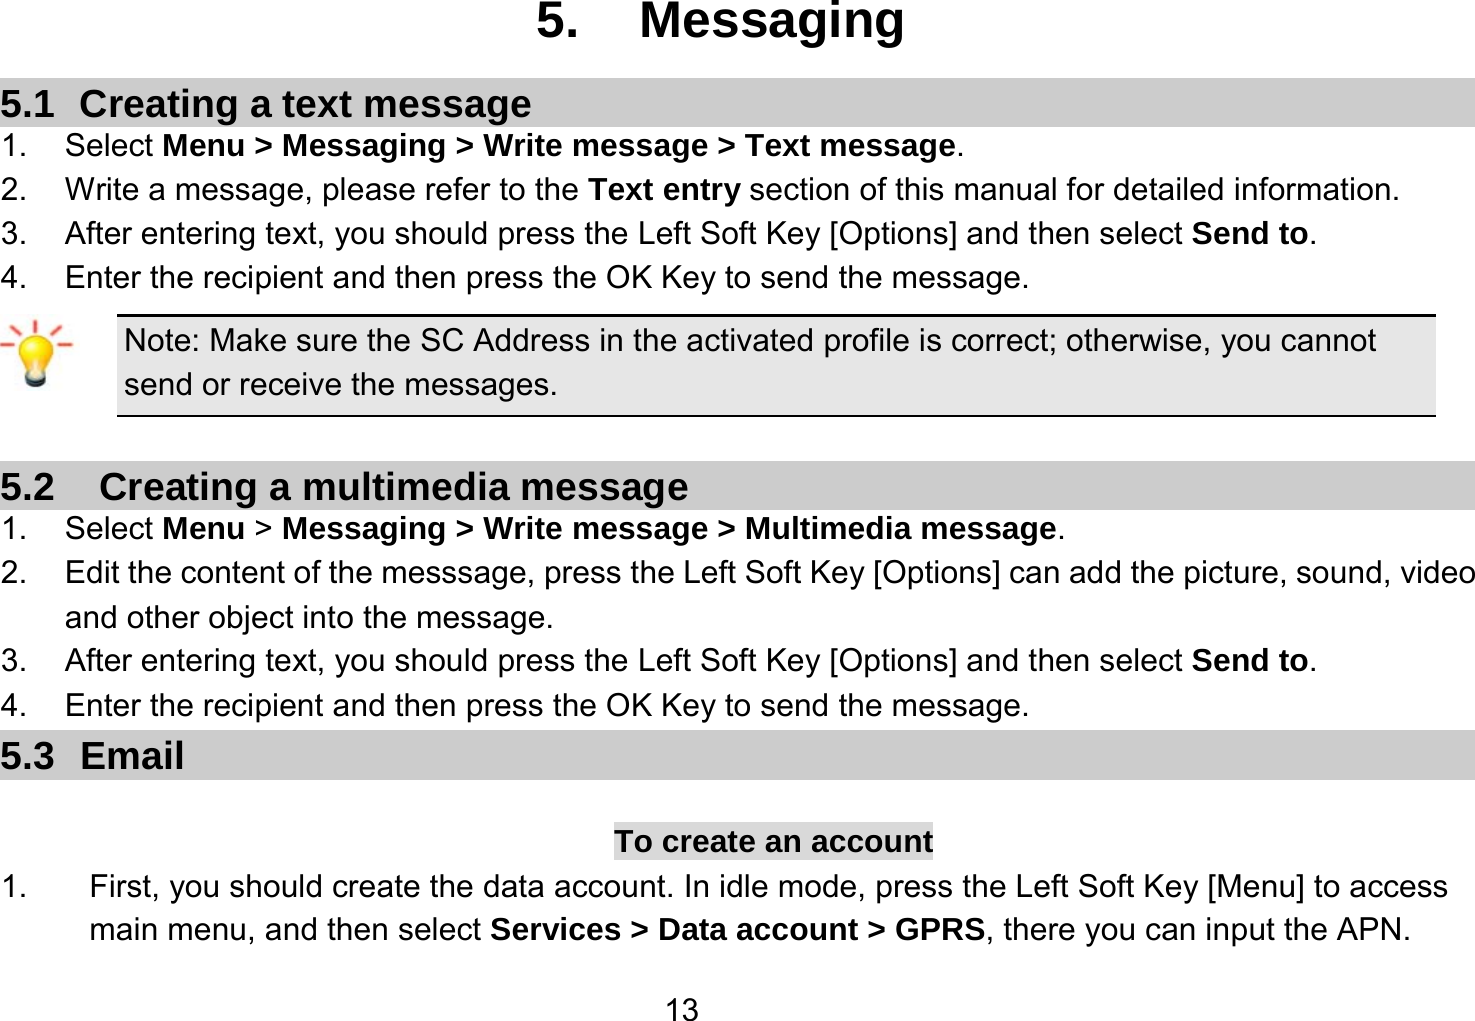   135. Messaging 5.1  Creating a text message 1. Select Menu &gt; Messaging &gt; Write message &gt; Text message. 2.  Write a message, please refer to the Text entry section of this manual for detailed information. 3.  After entering text, you should press the Left Soft Key [Options] and then select Send to. 4.  Enter the recipient and then press the OK Key to send the message. Note: Make sure the SC Address in the activated profile is correct; otherwise, you cannot send or receive the messages.  5.2    Creating a multimedia message 1. Select Menu &gt; Messaging &gt; Write message &gt; Multimedia message. 2.  Edit the content of the messsage, press the Left Soft Key [Options] can add the picture, sound, video and other object into the message. 3.  After entering text, you should press the Left Soft Key [Options] and then select Send to. 4.  Enter the recipient and then press the OK Key to send the message. 5.3 Email  To create an account 1.  First, you should create the data account. In idle mode, press the Left Soft Key [Menu] to access main menu, and then select Services &gt; Data account &gt; GPRS, there you can input the APN. 